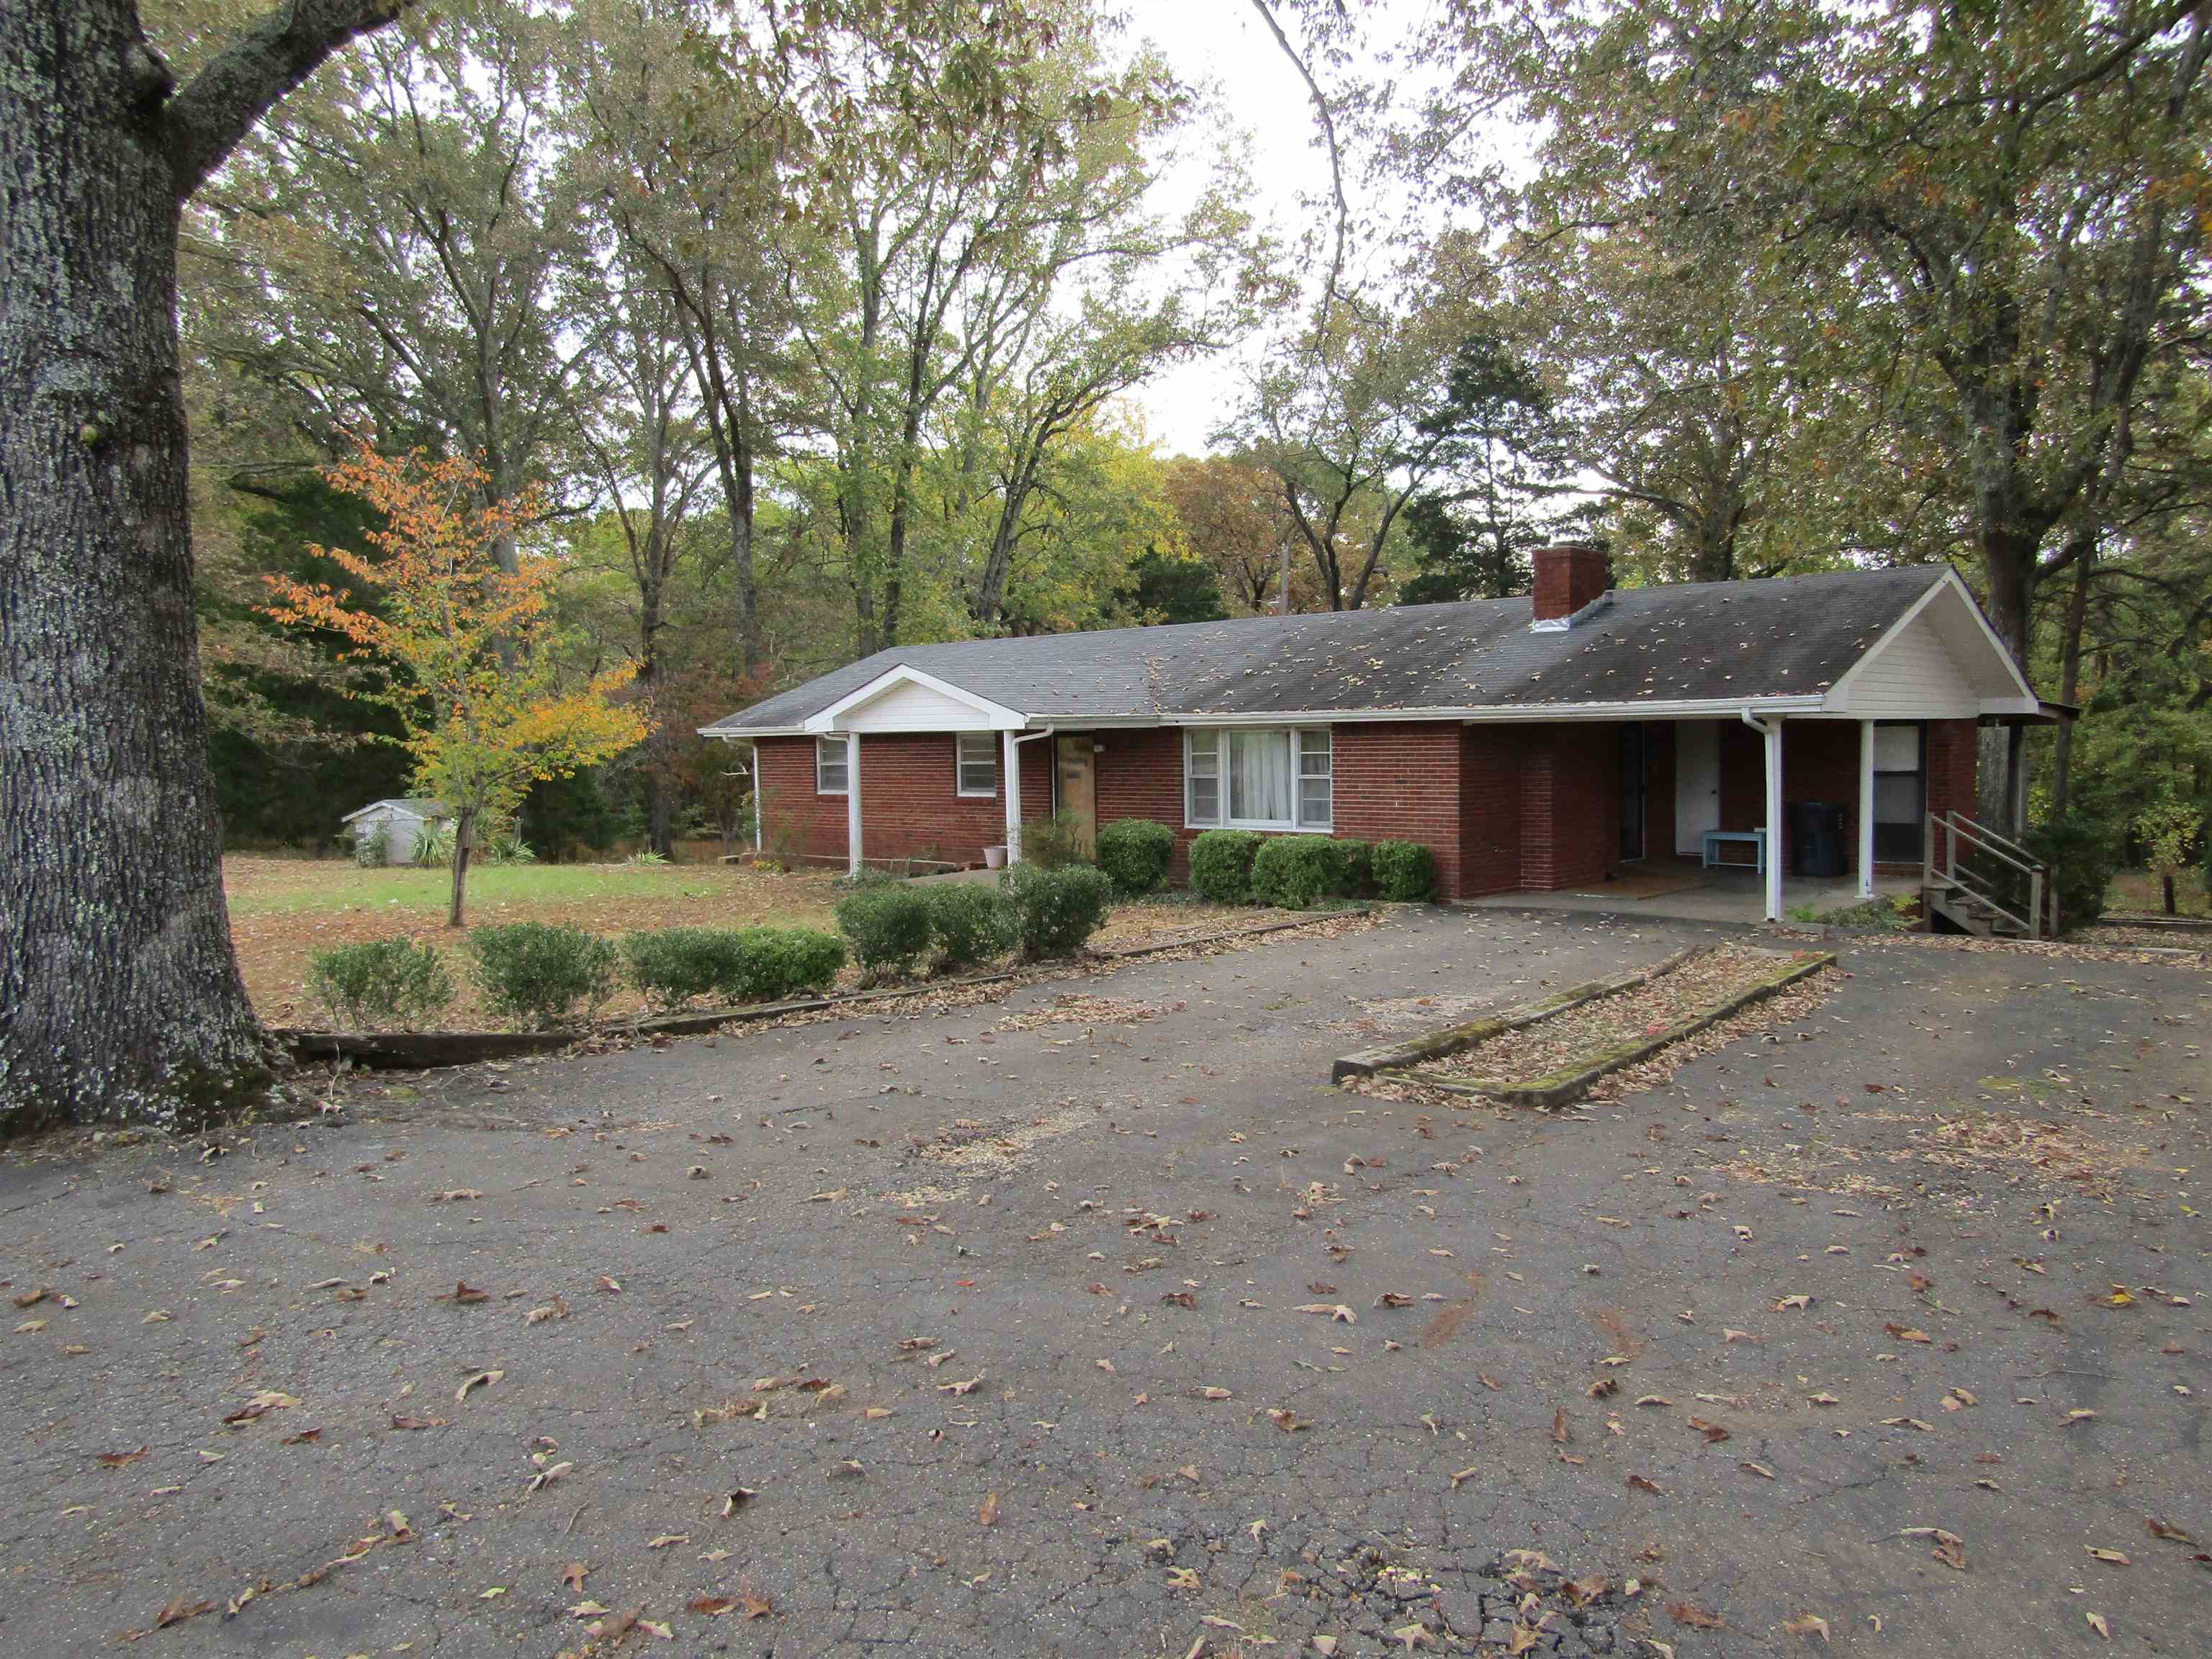 Don't miss your opportunity to own this well built 3 bed 2 bath brick ranch on over 5.3 acres inside the Russellville City Limits.  This home sits on a wonderful heavily wooded lot with several acres of fenced pasture.  There are lots of possibilities with the full unfinished basement.  The back drive features a large two car carport parking area.  There is a shared drive to the pasture and the small barn on the back of the property.  Come see this one before it is too late.